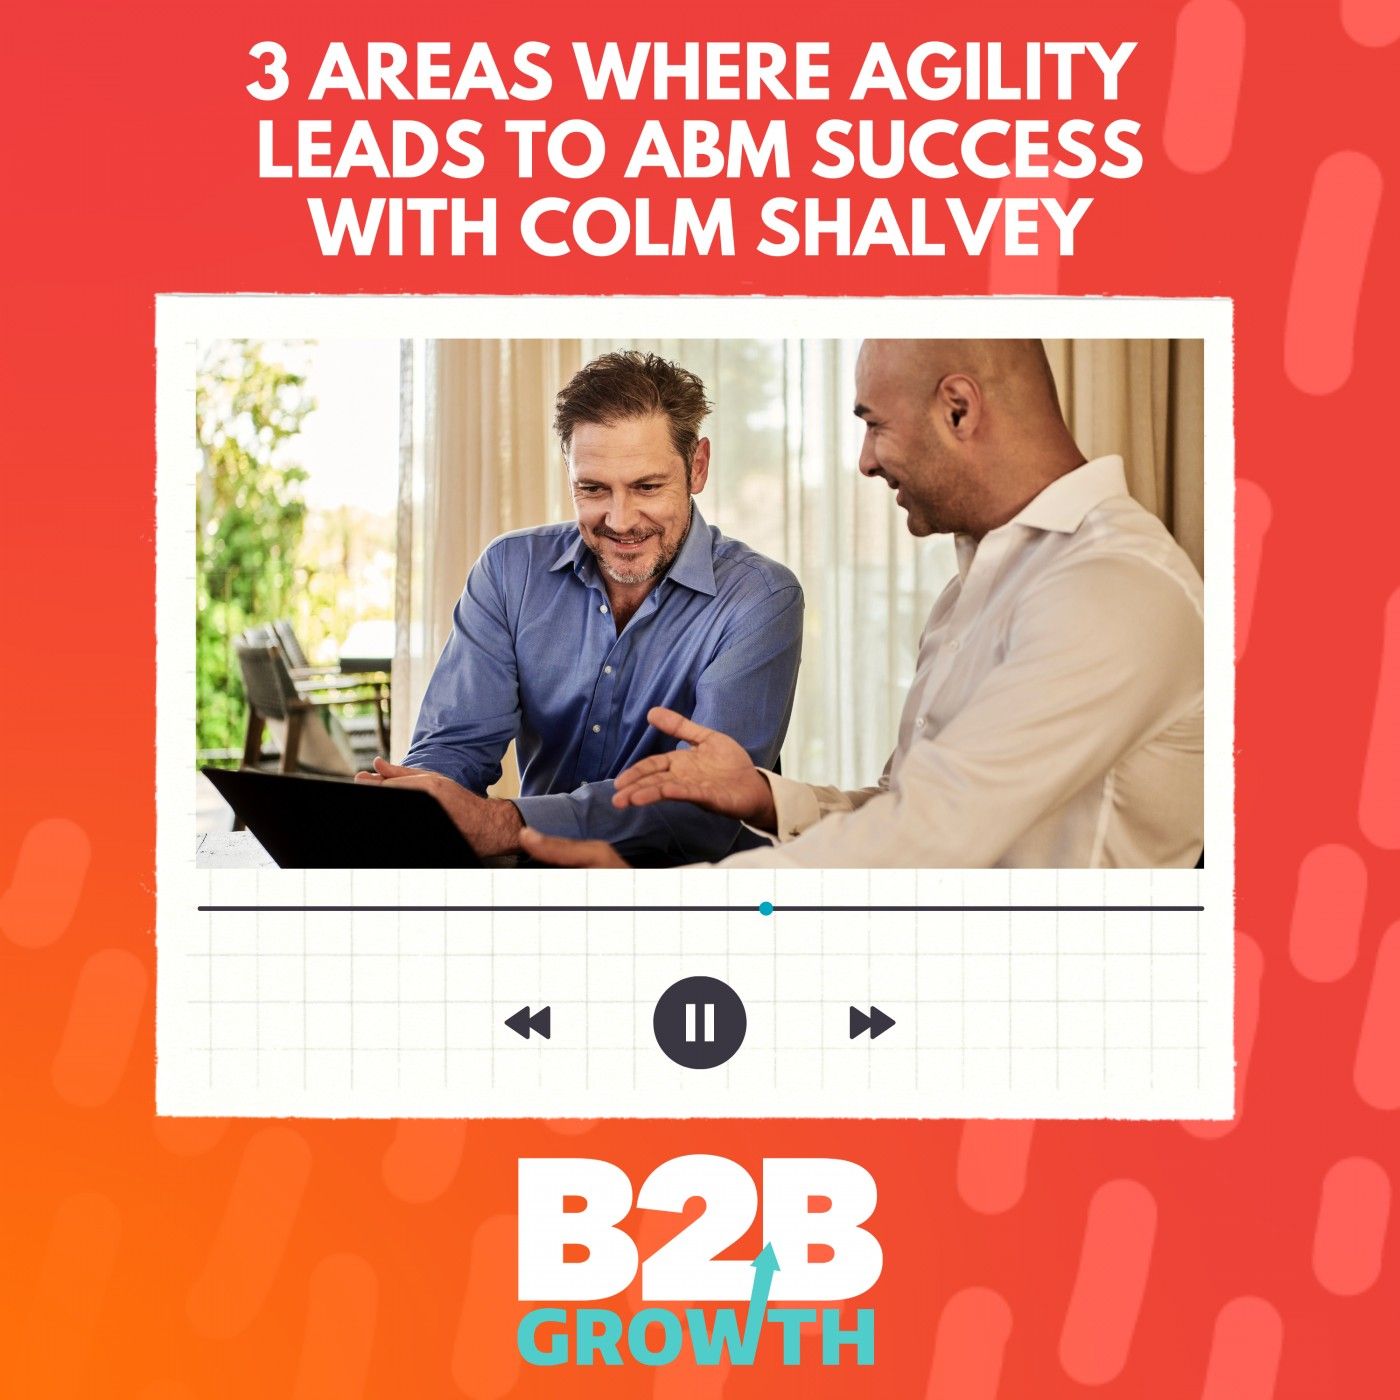 3 Areas Where Agility Leads to ABM Success, with Colm Shalvey